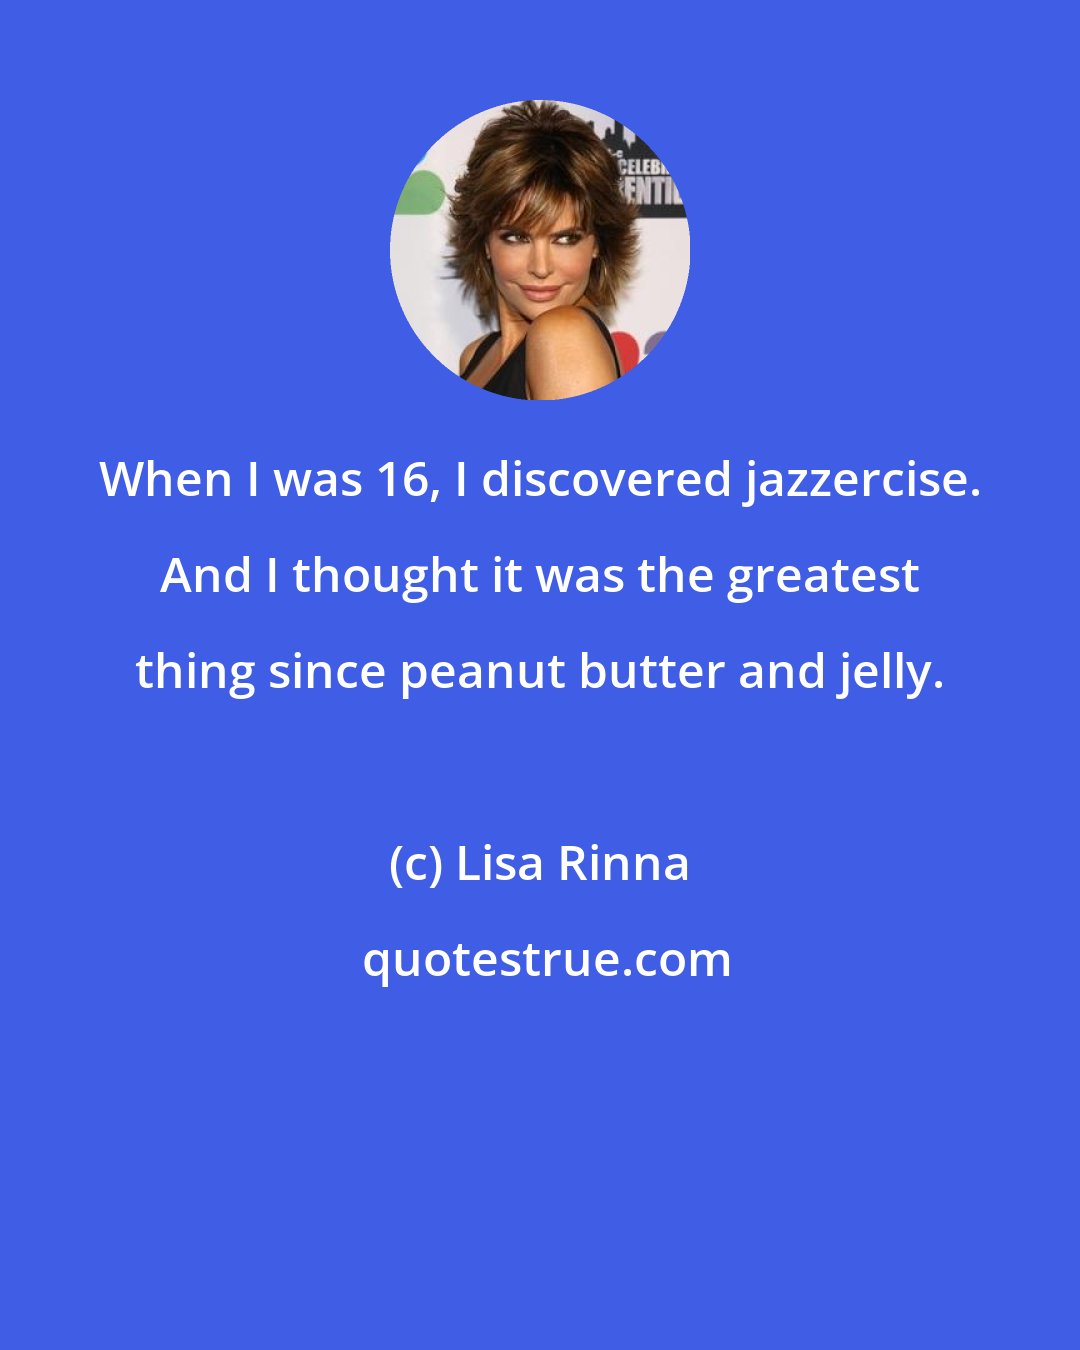 Lisa Rinna: When I was 16, I discovered jazzercise. And I thought it was the greatest thing since peanut butter and jelly.